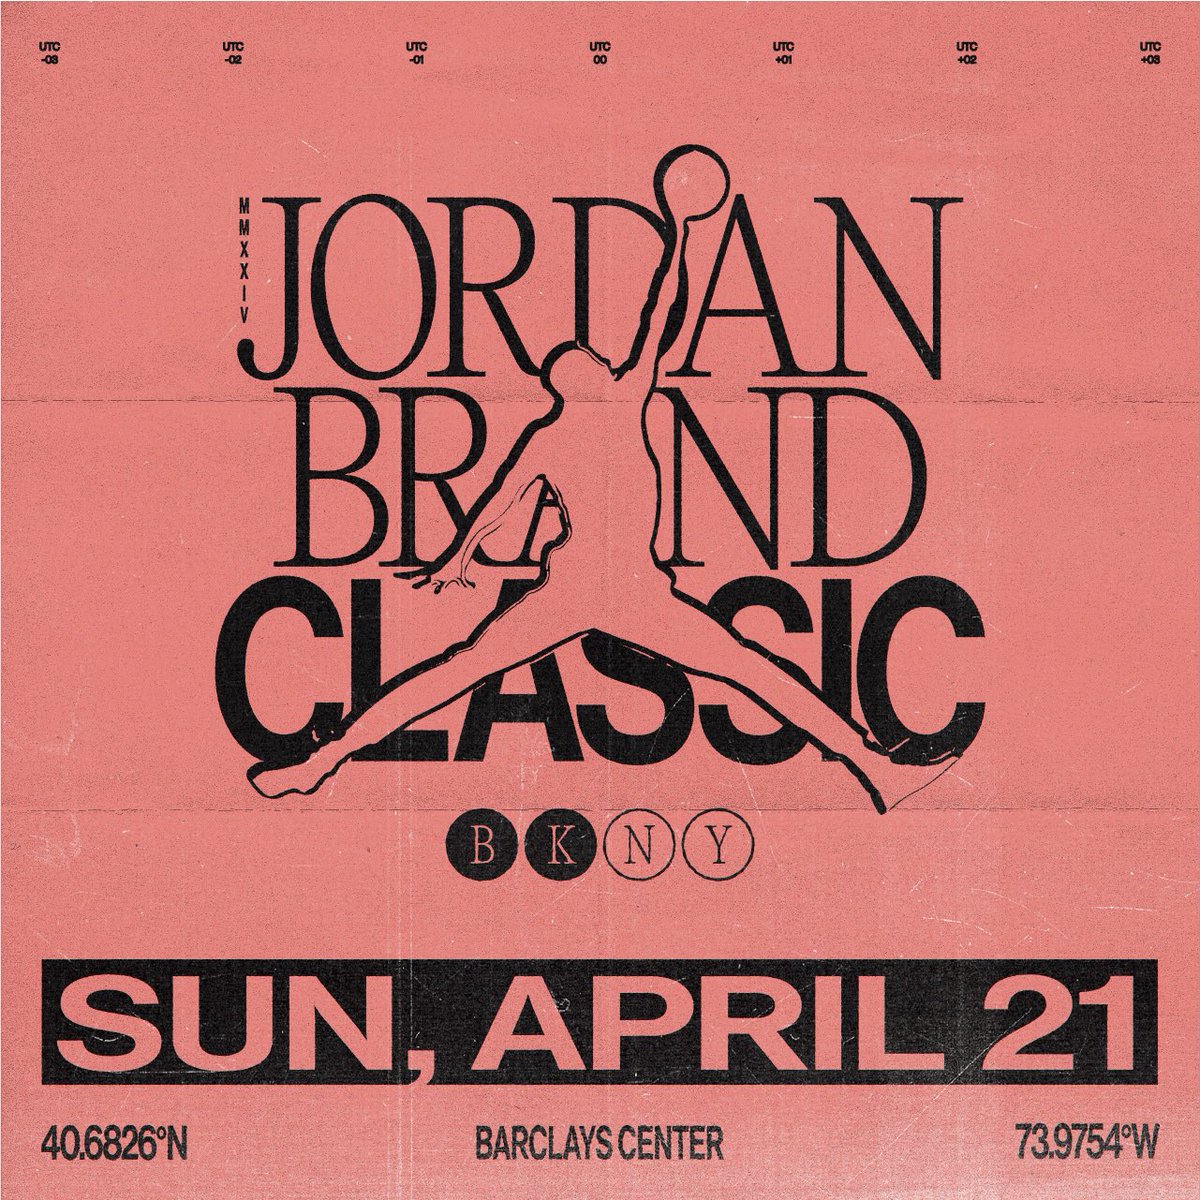 TODAY! Jordan Brand Classic 🏀⛹️‍♀️⛹️‍♂️ Doors: 3PM Reminder: Barclays Center is a smoke-free & vape-free venue. Guests who violate this policy may have materials confiscated or be subject to ejection. Please review our prohibited items before arrival. barclayscenter.com/events/detail/…